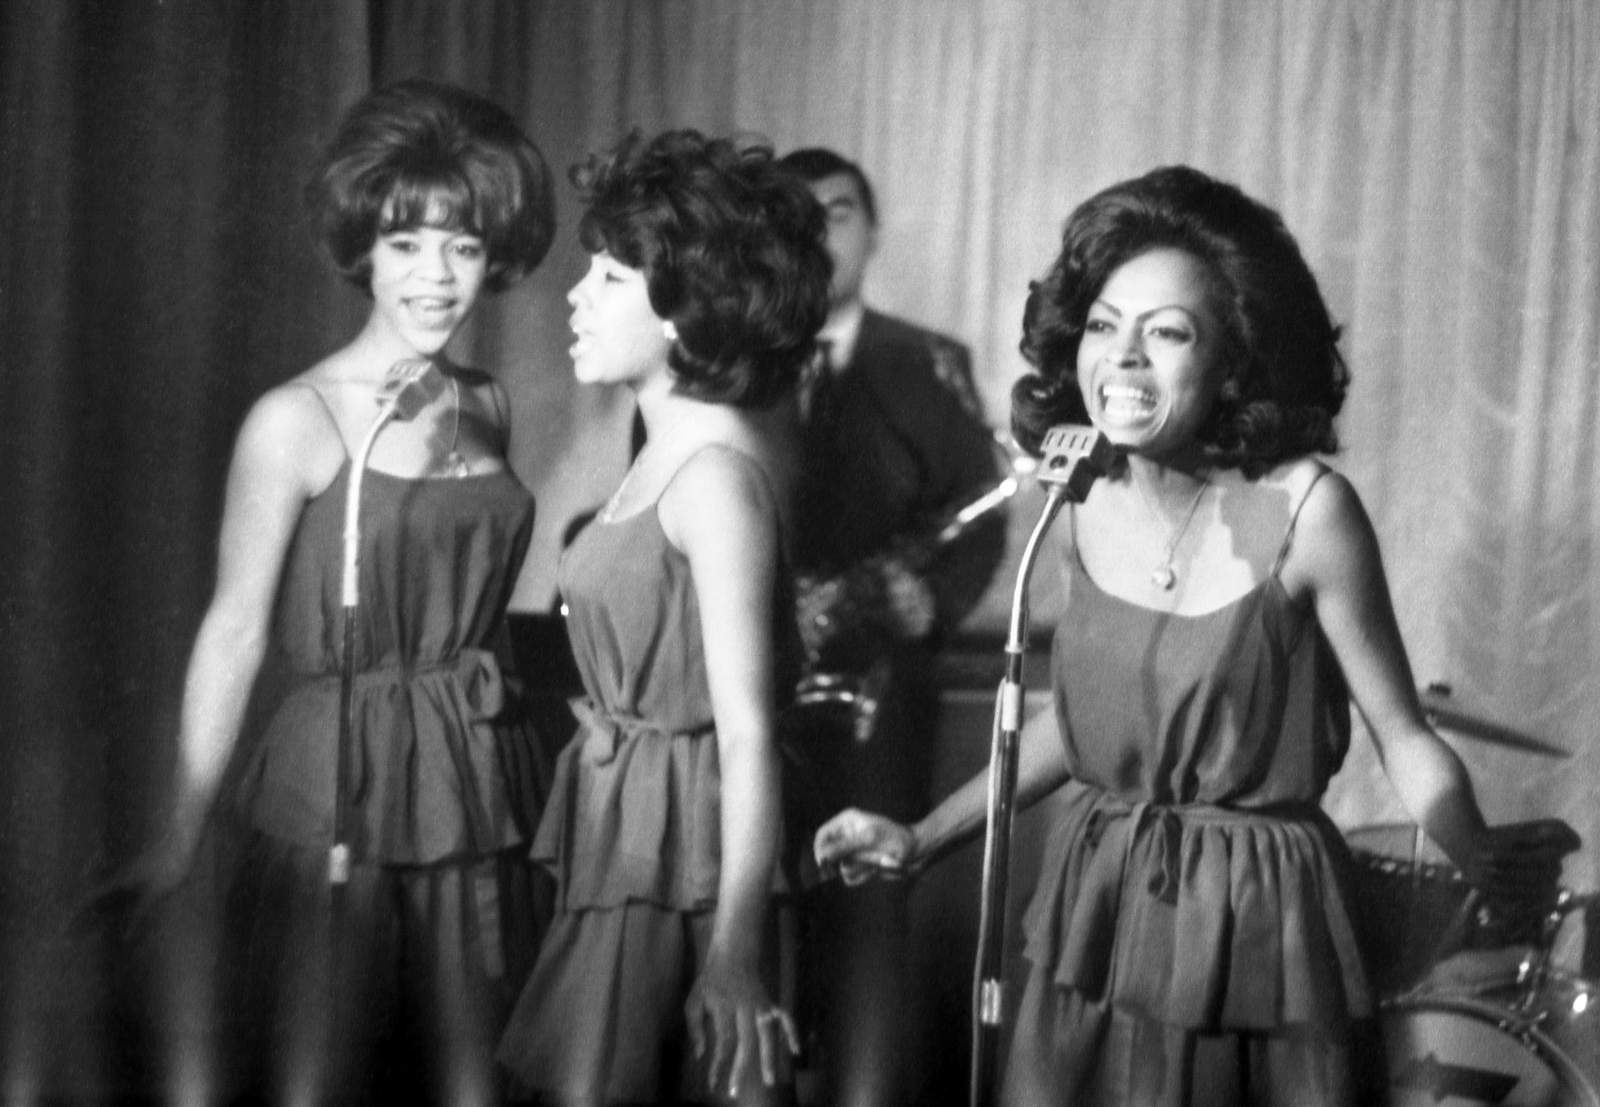 Morning Briefing Feb. 9, 2021: Motown legend Mary Wilson dies, WHO findings from China lab, polar bear dies at Detroit Zoo and more